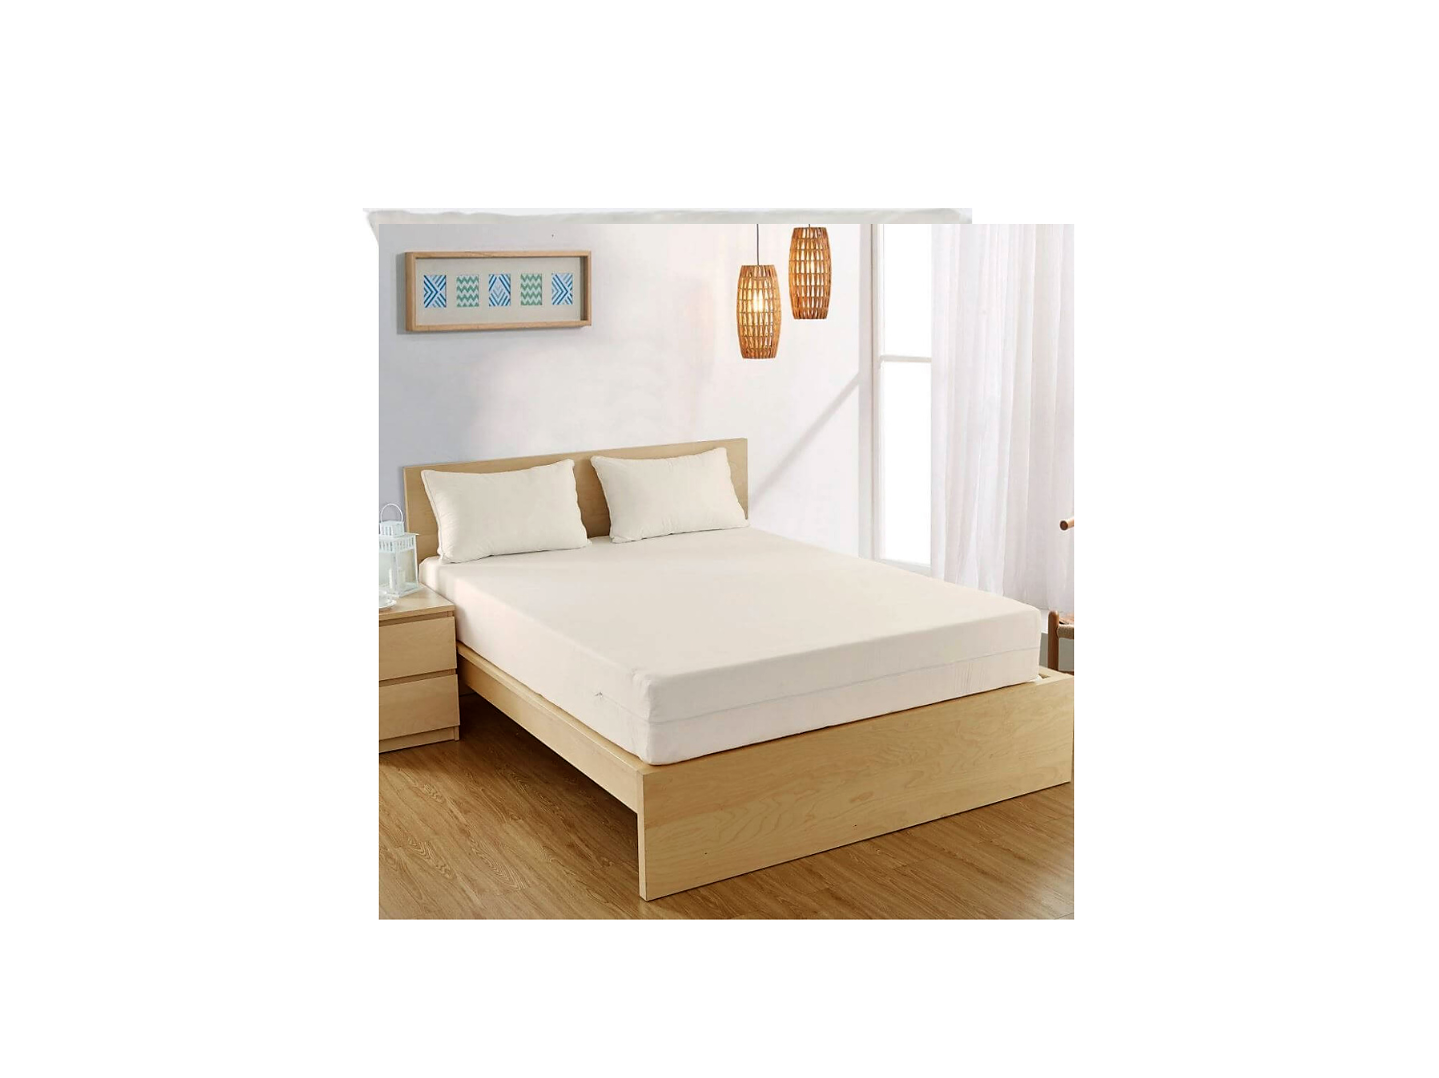 allergycare mattress cover reviews